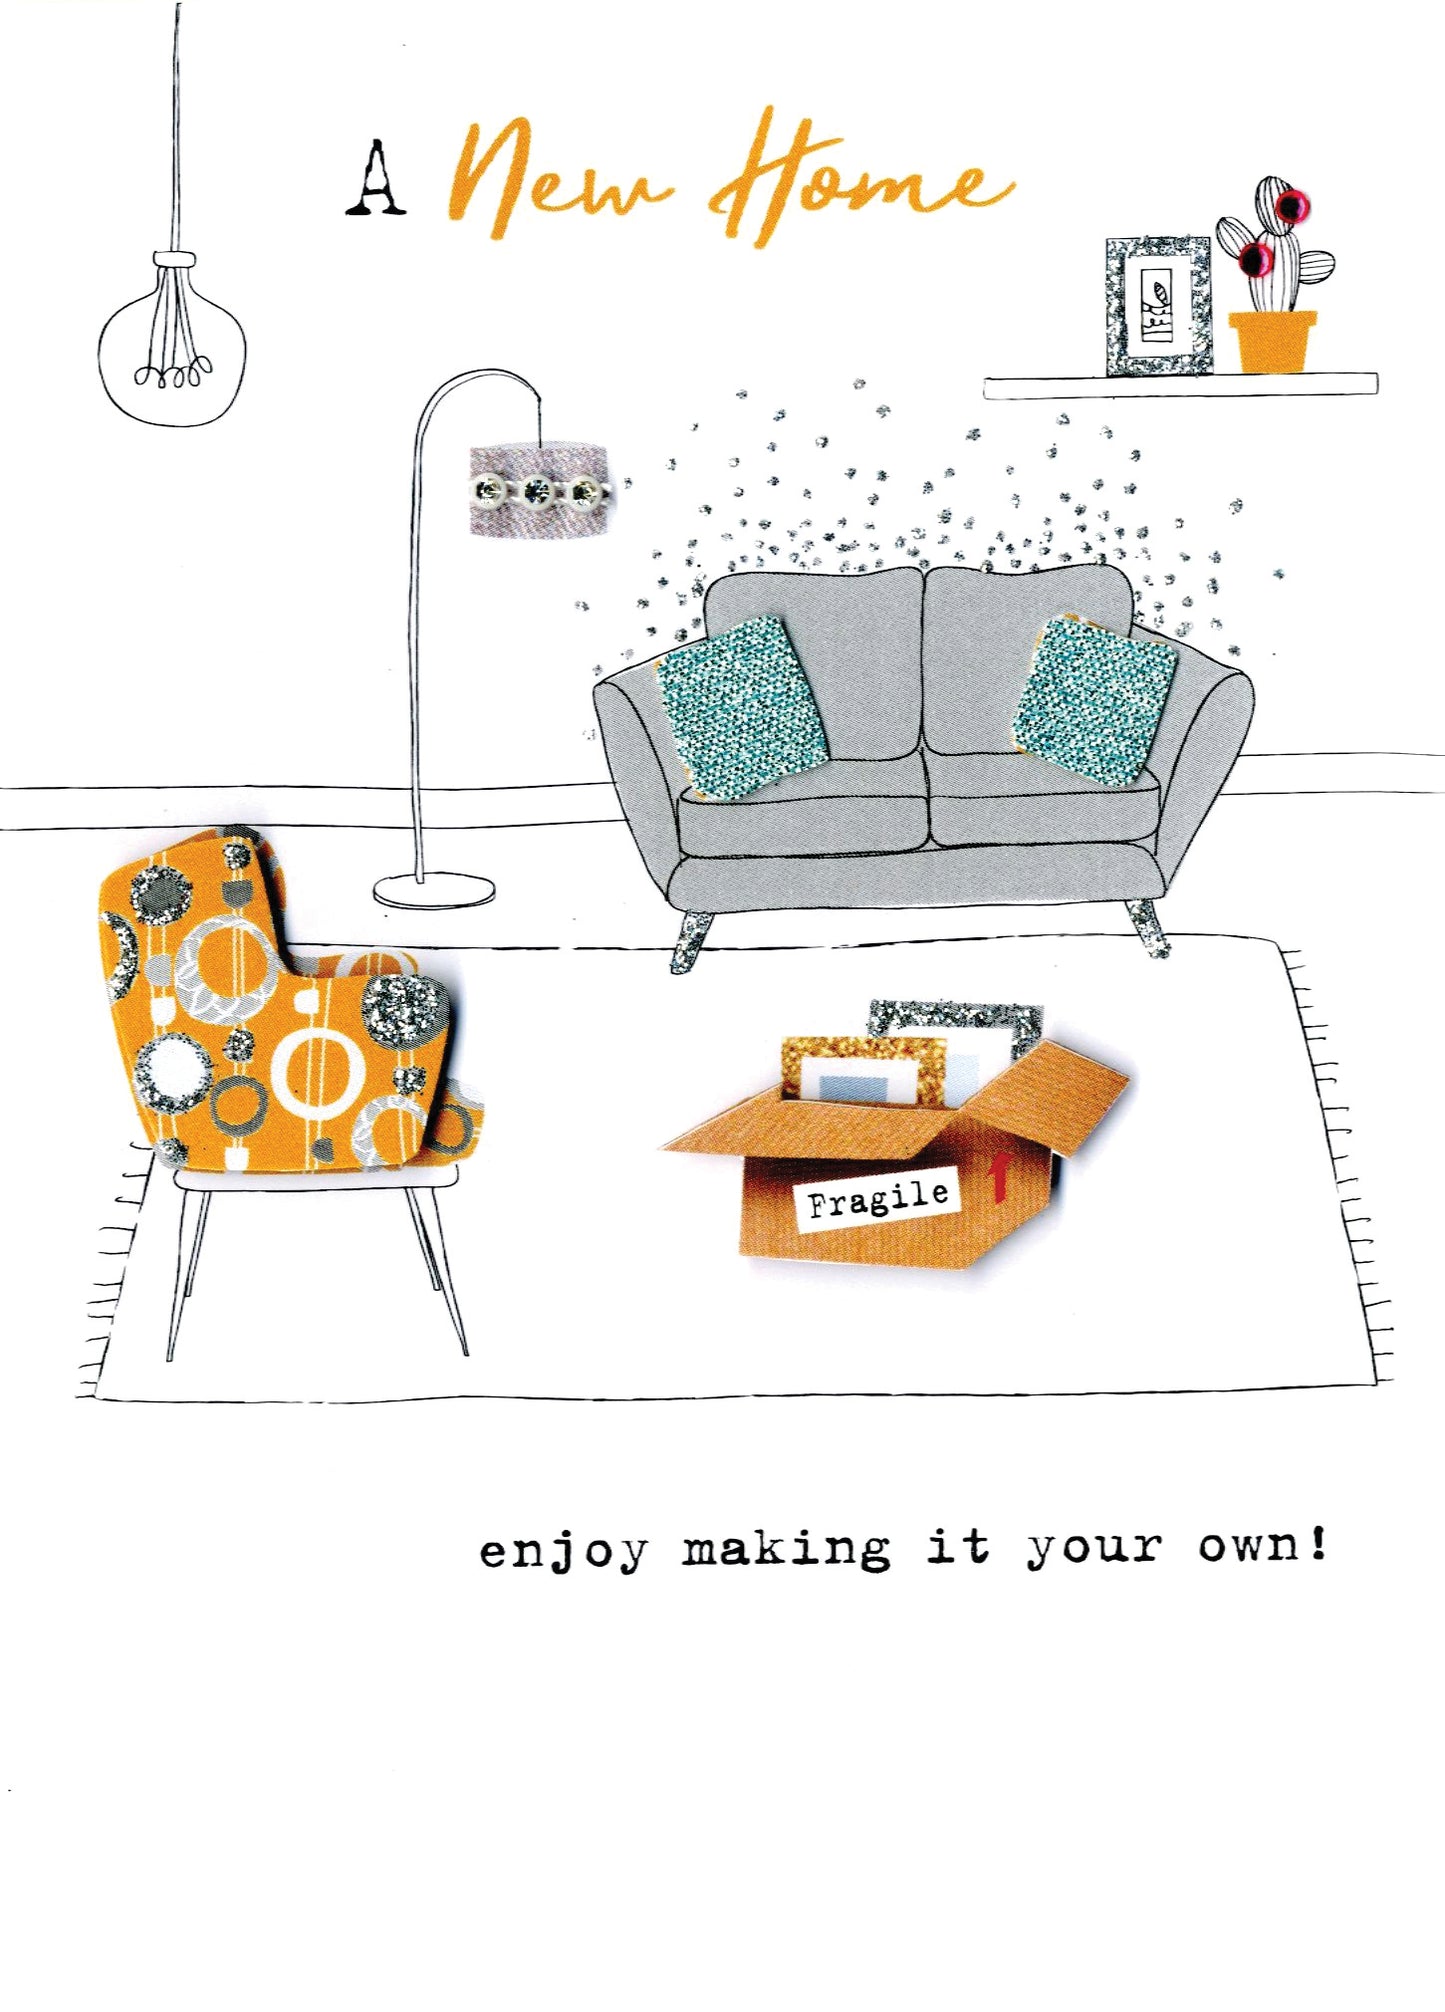 New Home Enjoy Making It Your Own Irresistible Greeting Card